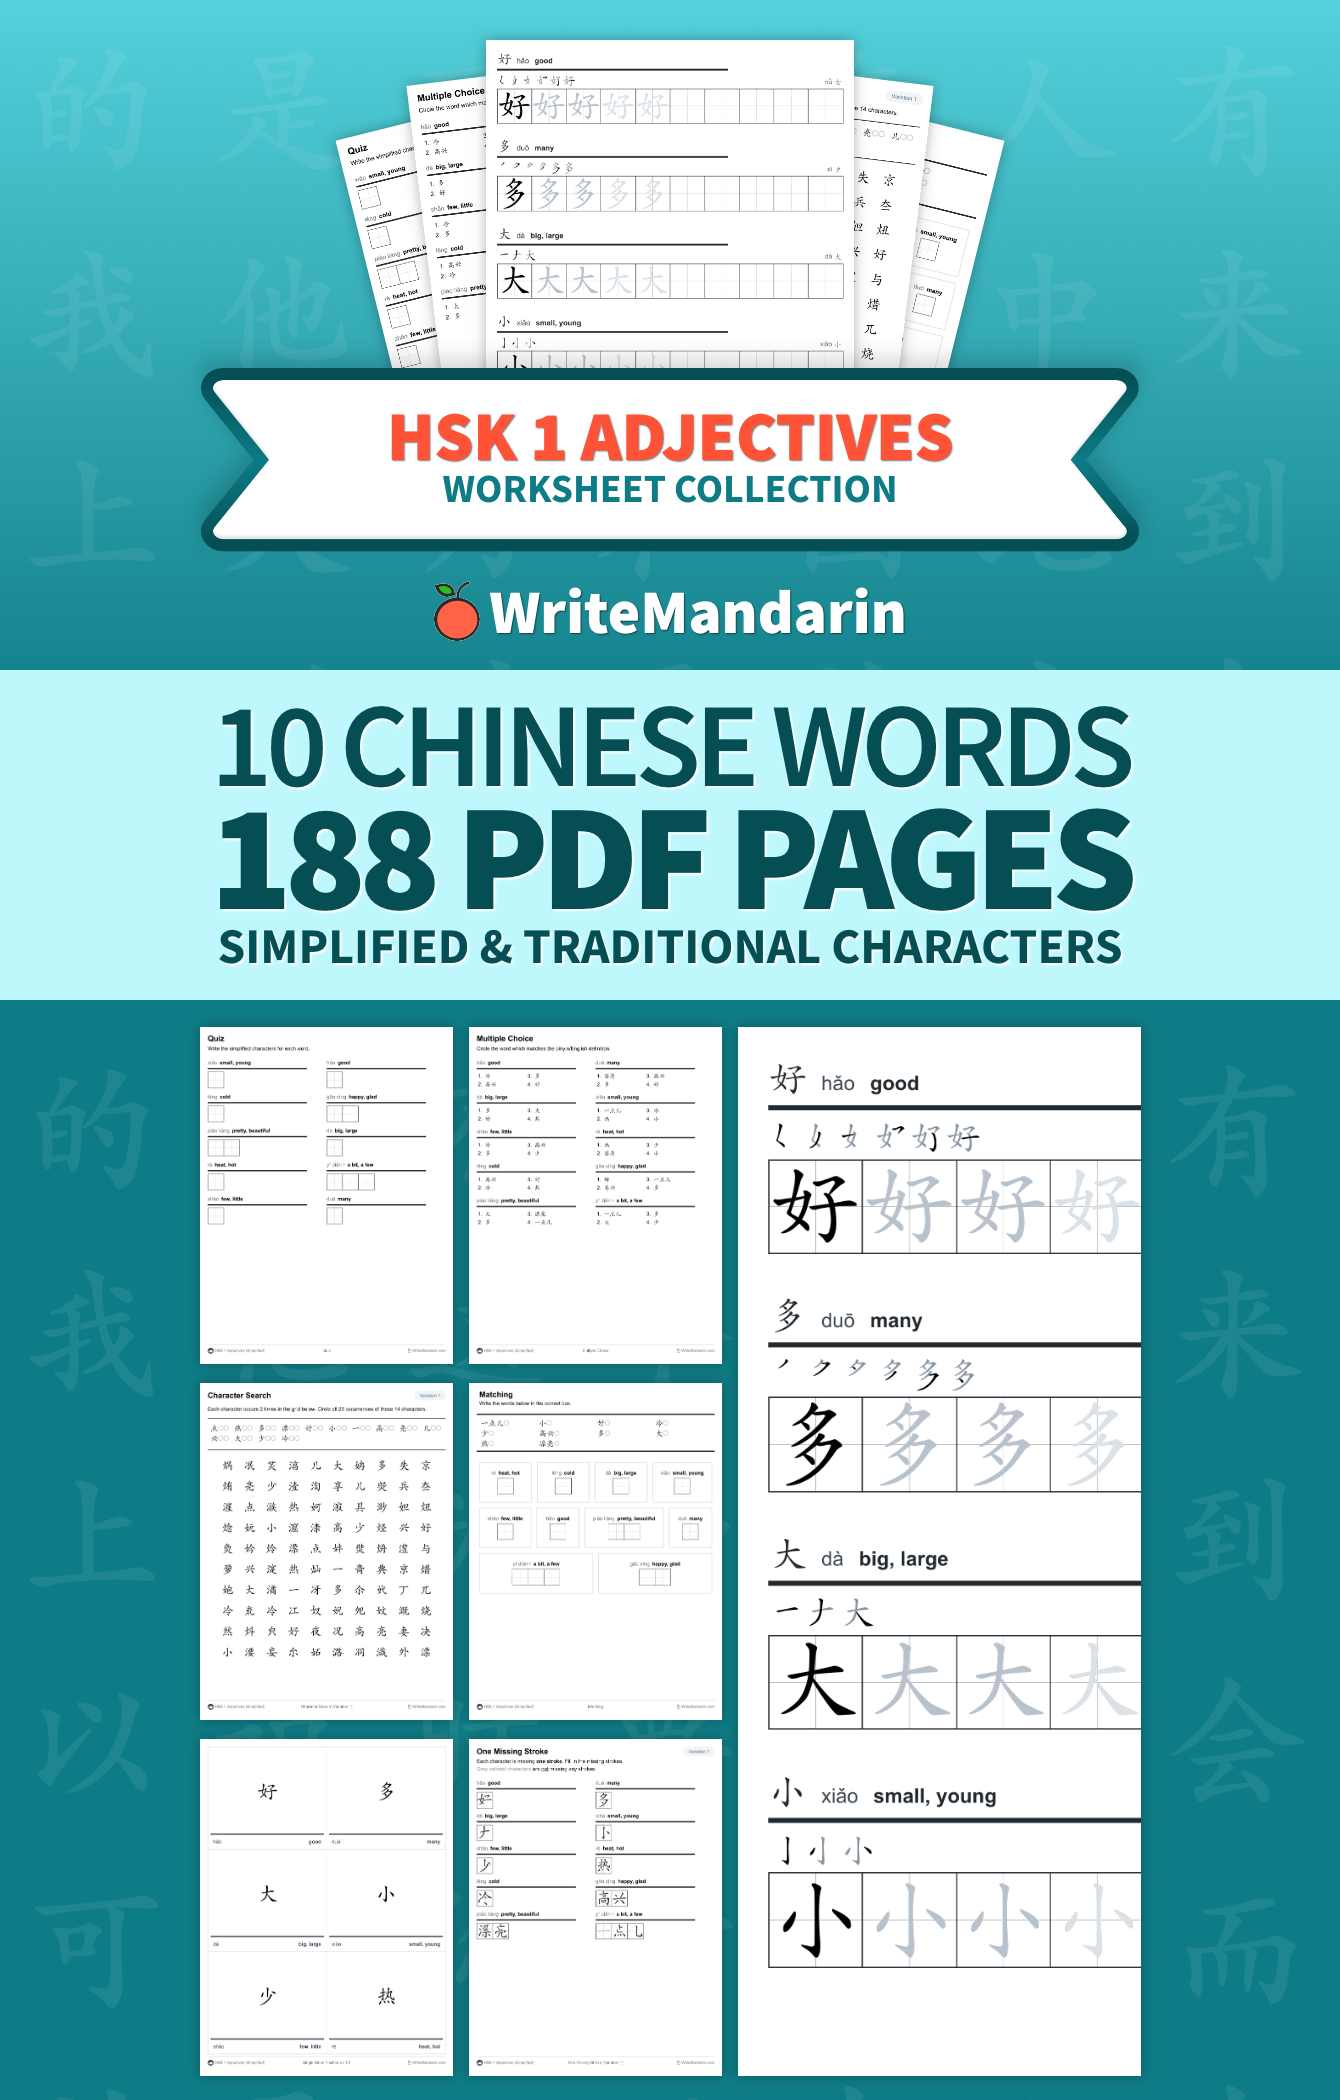 Preview image of HSK 1 Adjectives worksheet collection